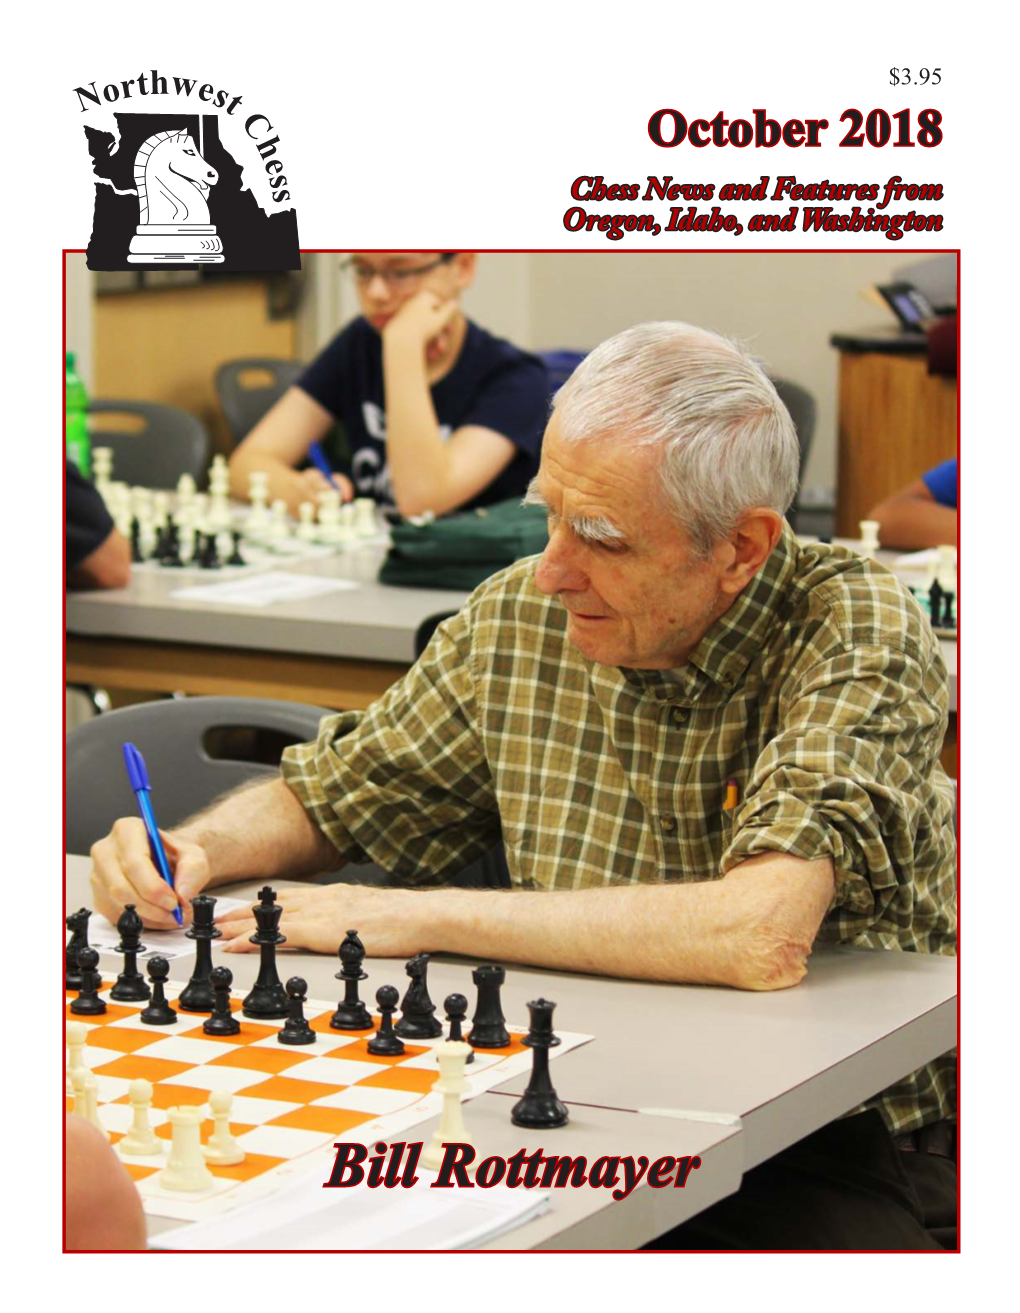 Bill Rottmayer on the Front Cover: Northwest Chess Bill Rottmayer, the Oldest Participant in the Spokane Falls October 2018, Volume 72-10 Issue 849 Open